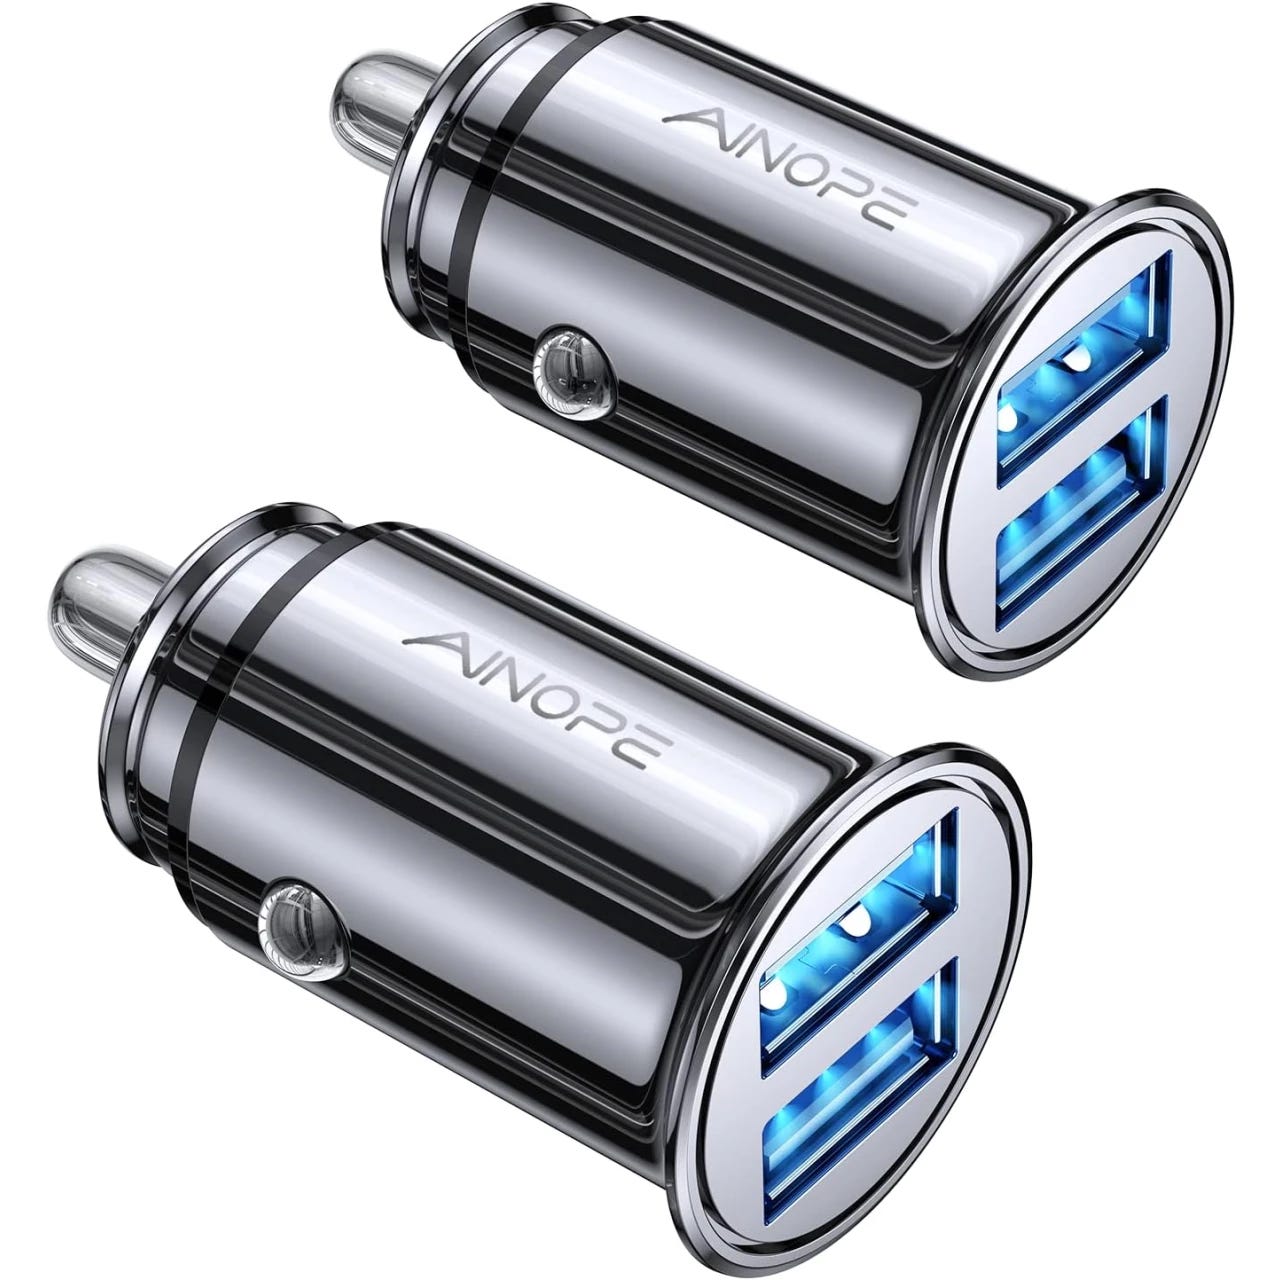 Top 5 Car Chargers in 2023: AINOPE, Fast Charge Dual Port, and More, by  Enrique